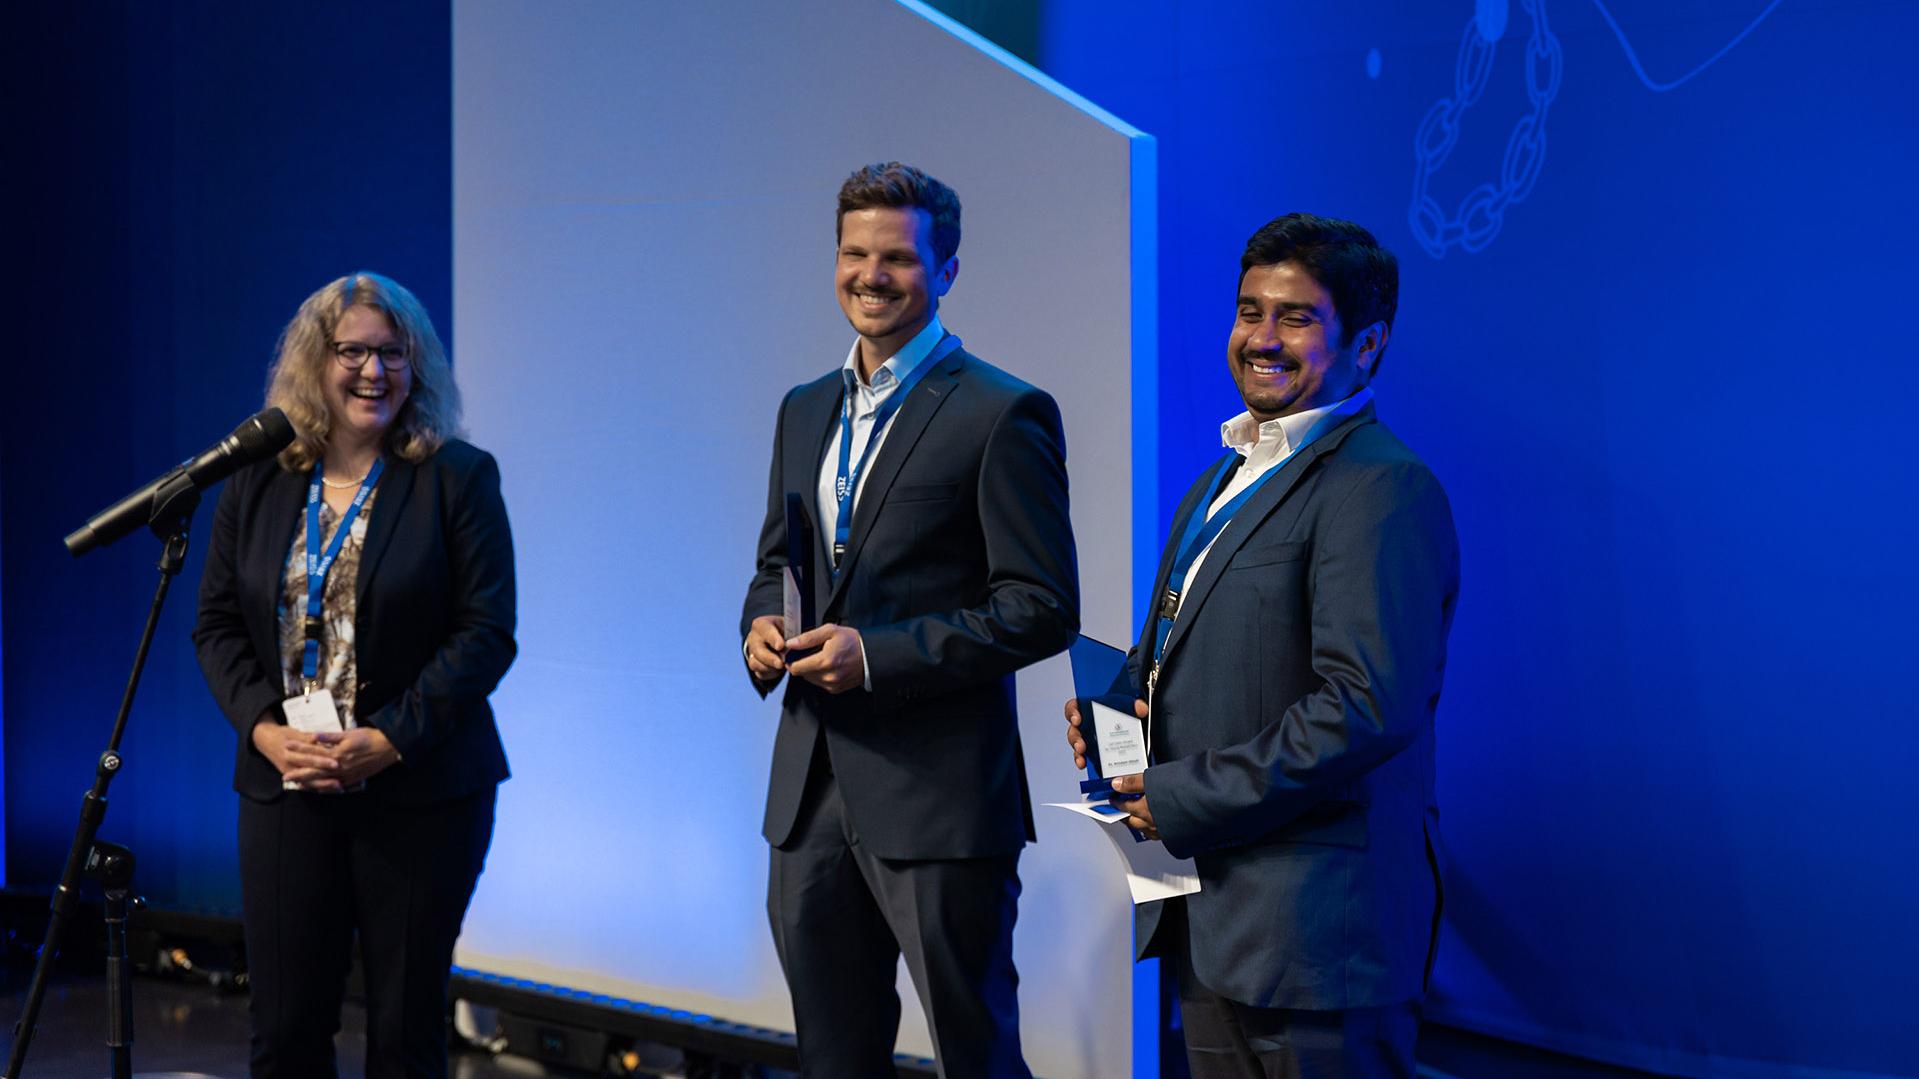 Prof. Dr. Christine Silberhorn (University of Paderborn) and Carl Zeiss Award for Young Researchers winners Dr. Simon Baier and Dr. Arindam Ghosh (Dr. Dasha Nelidova was prevented from accepting the award in person).